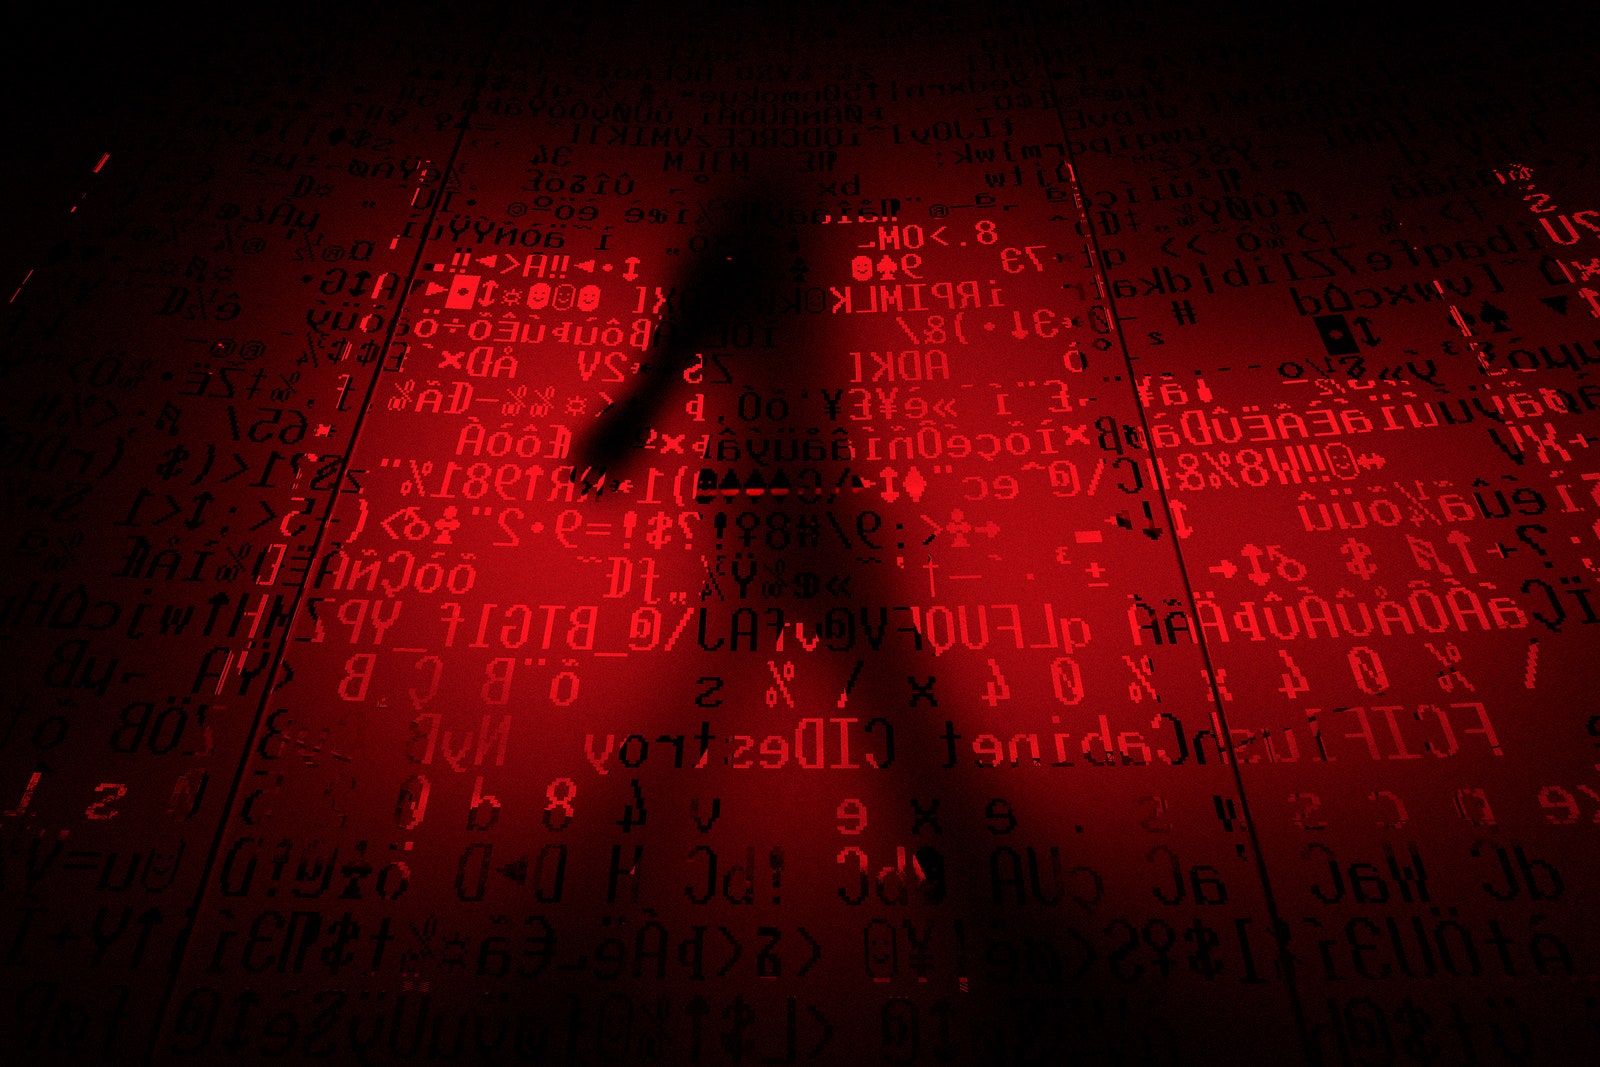 Silhouetted person walks behind a glass window that has computer code inscribed on it